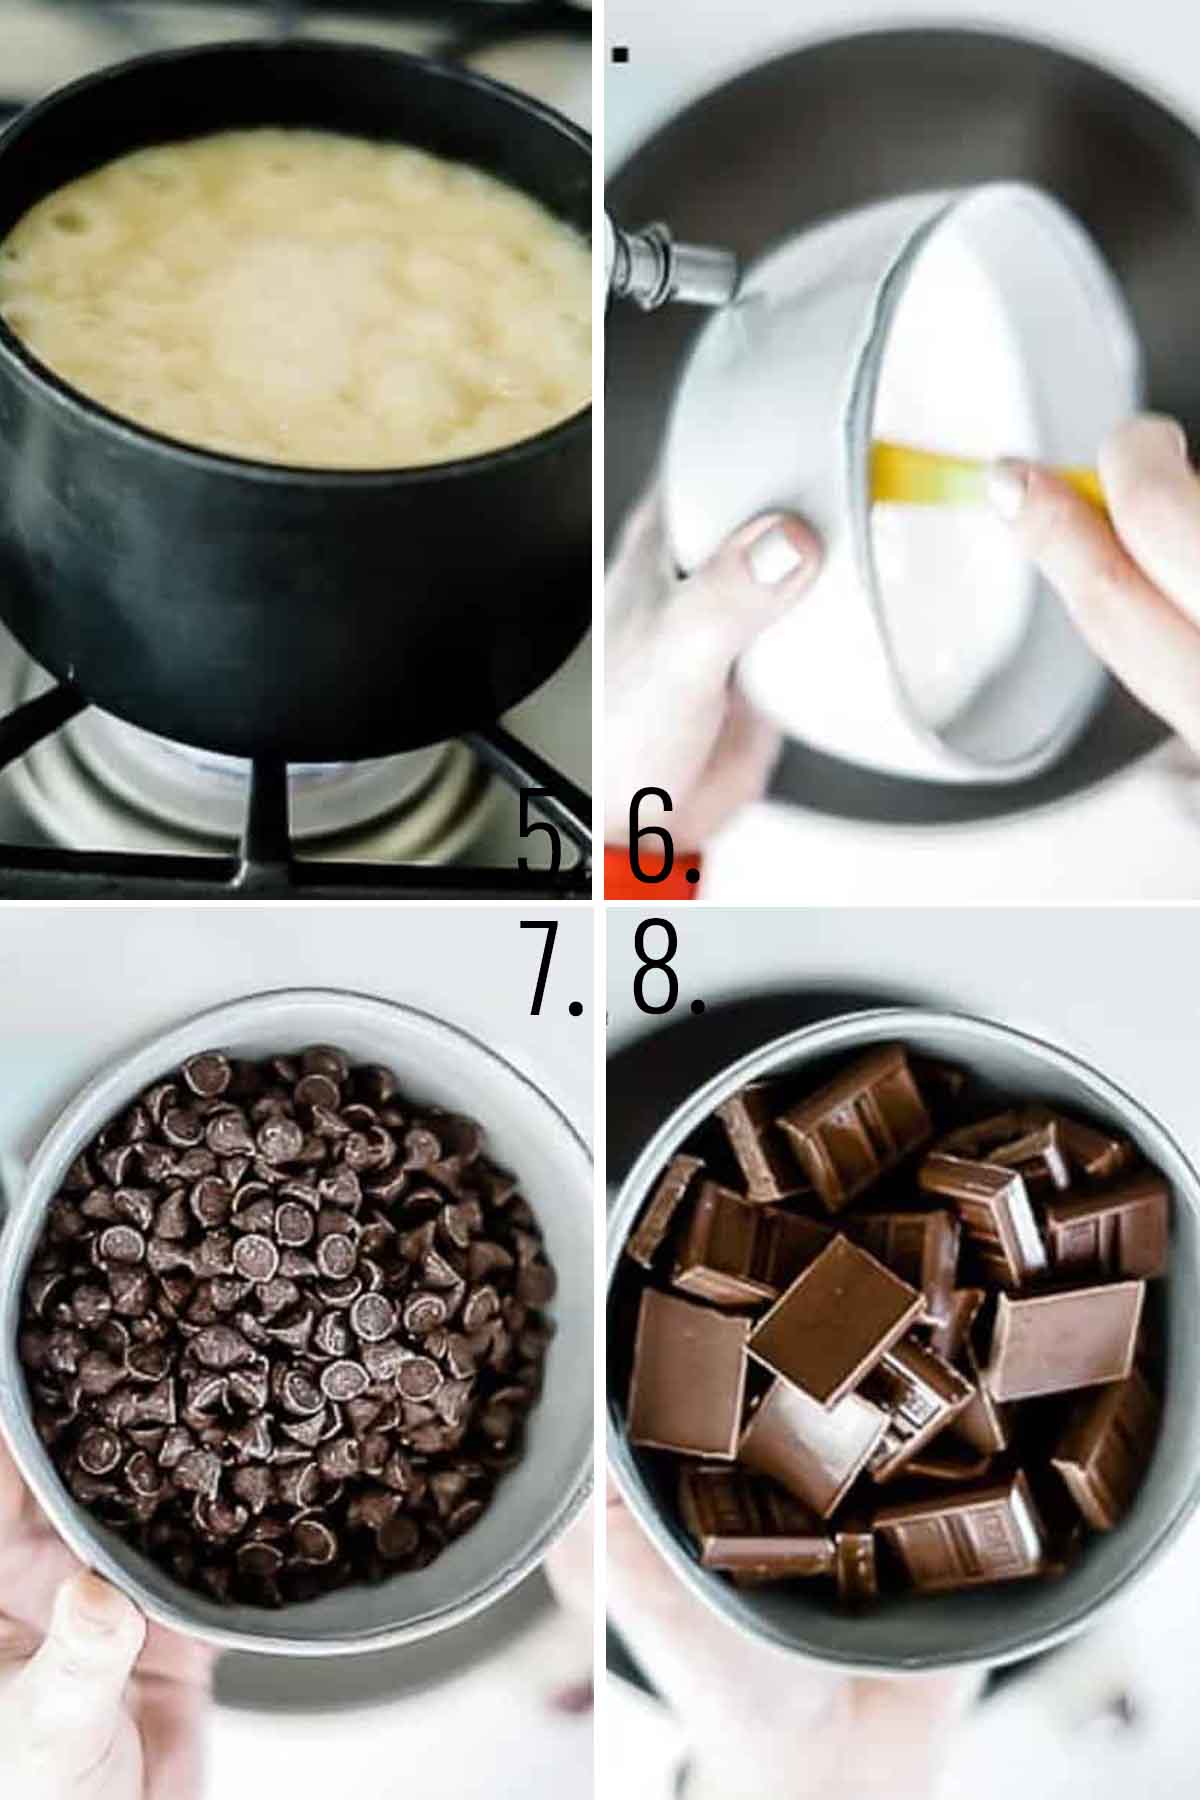 Collage of images showing how to make hershey's fudge.